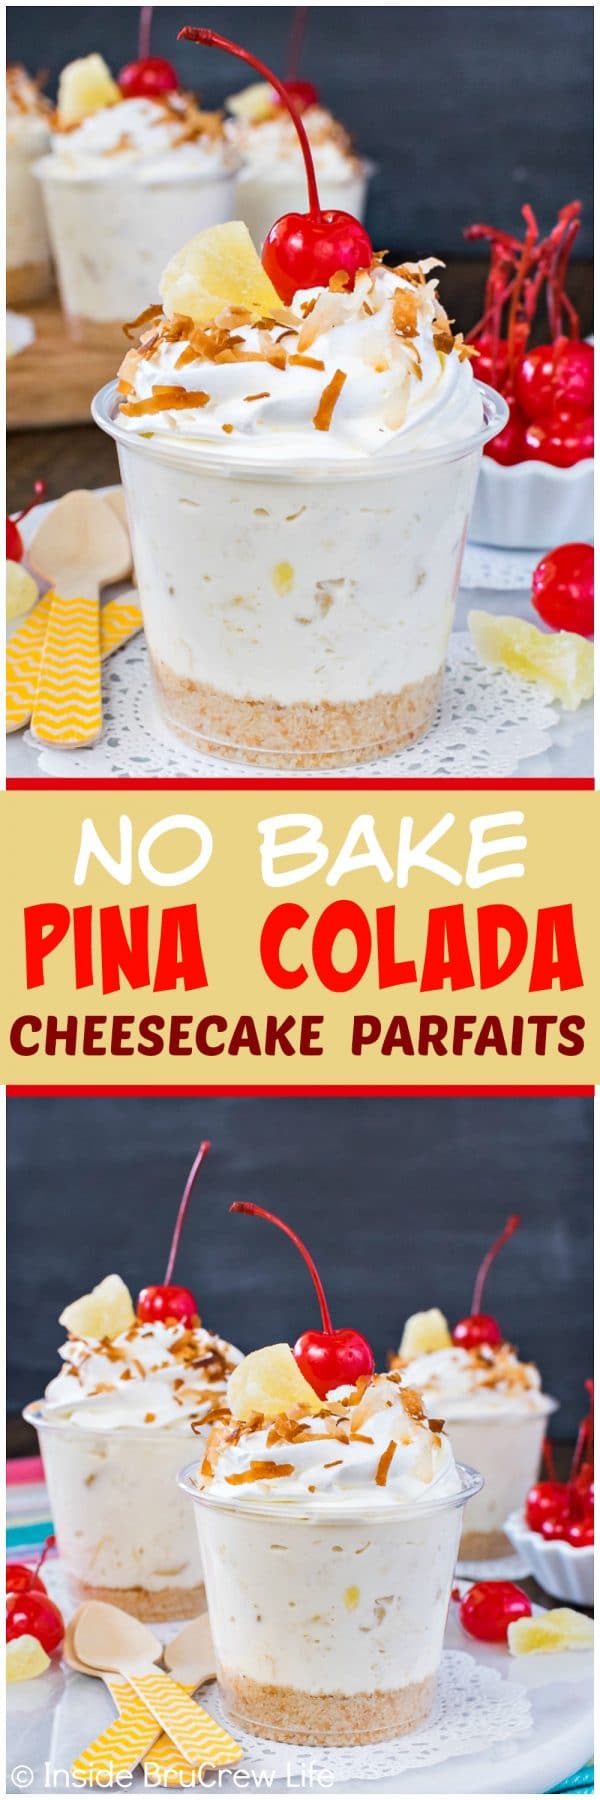 No Bake Pina Colada Cheesecake Parfaits - an easy no bake cheesecake filling full of pineapple and coconut makes a great dessert for summer picnics or parties. Easy recipe to put together in a few minutes!